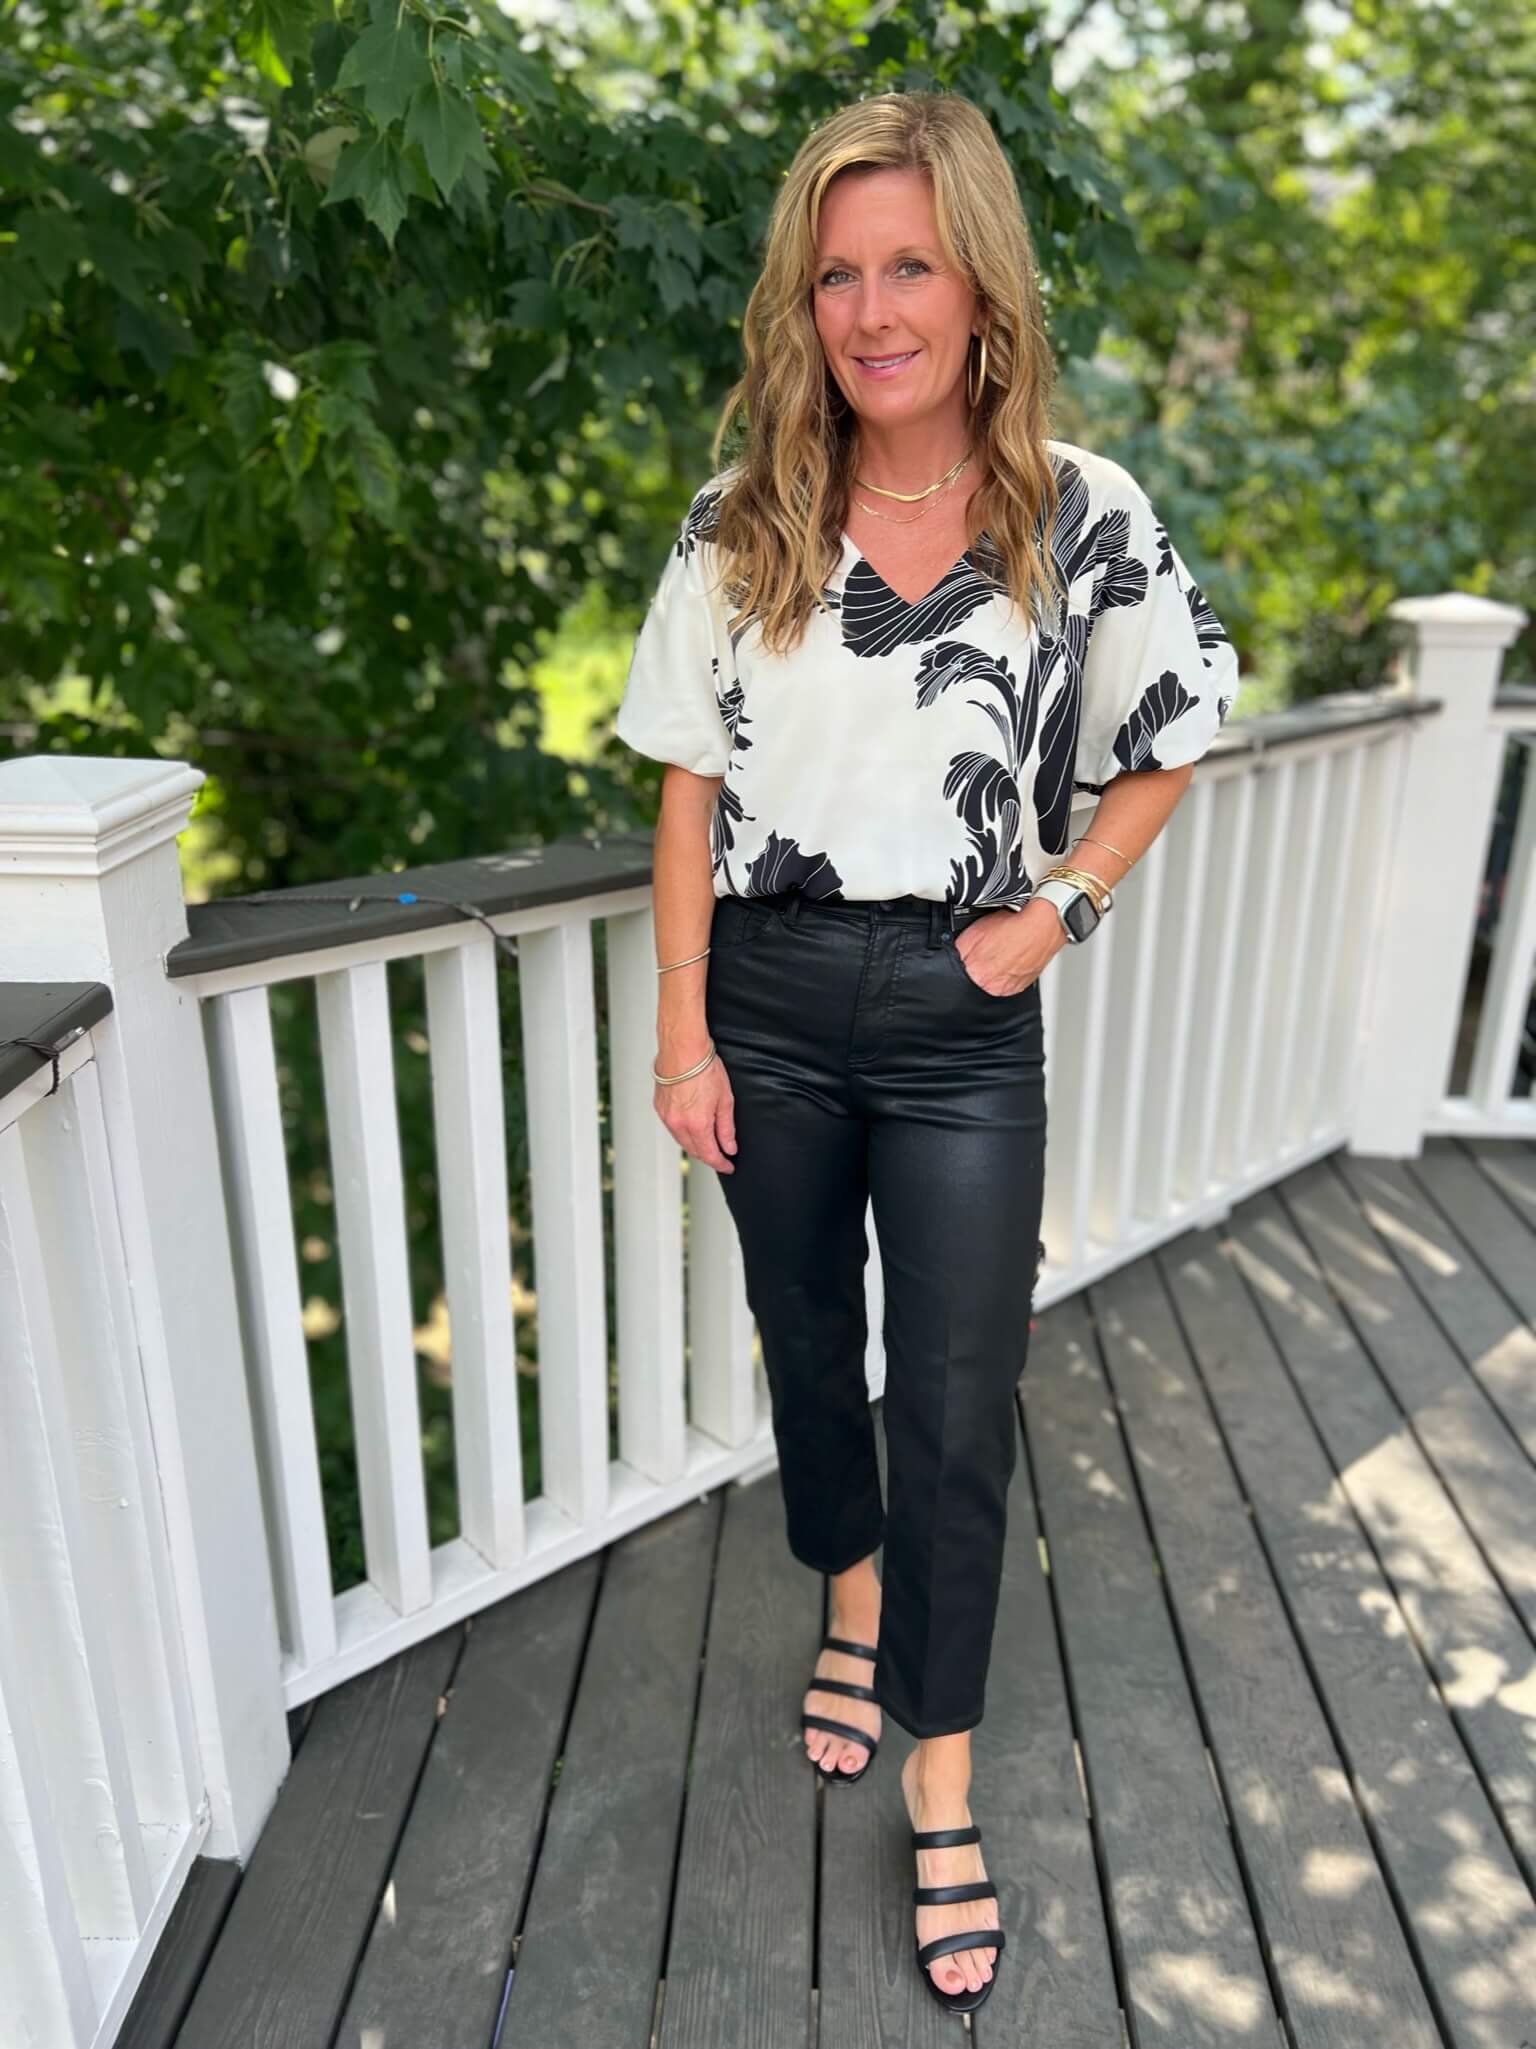 black and white printed v-neck bubble top and coated jeans how to wear black and white black and white style inspiration fun date night look what to wear for girls' night out